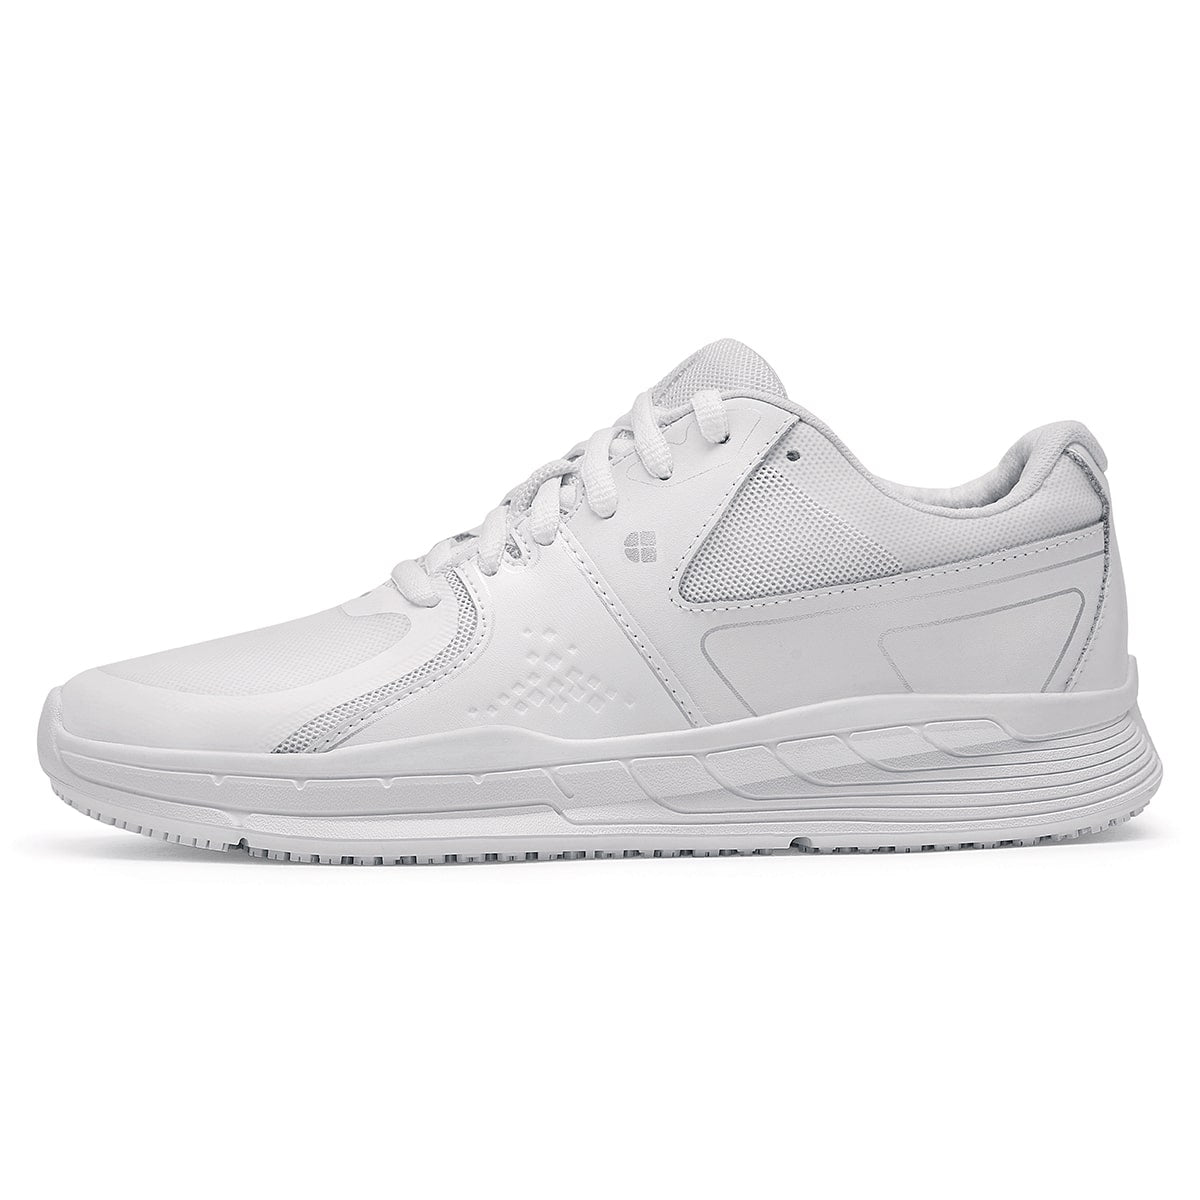 The Condor Women's White from Shoes for Crews is a slip-resistant shoe with laces, with additional padding and a removable cushioned insole, seen from the left.